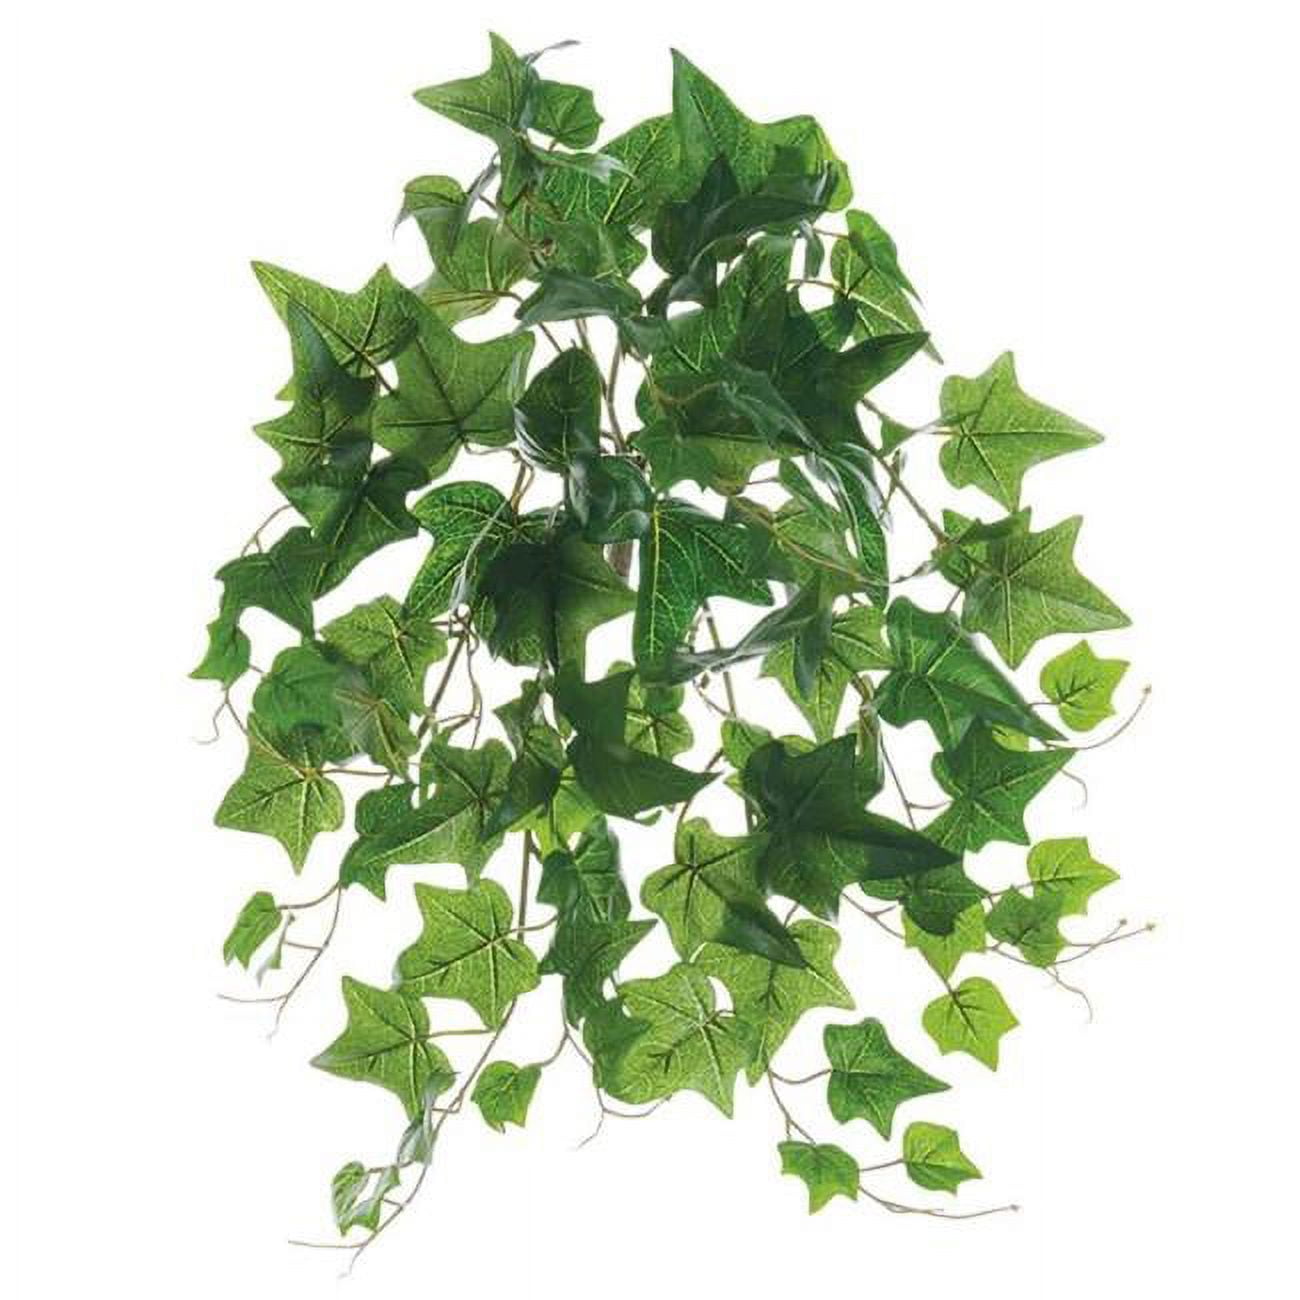 Picture of AllState Floral PBO031-GR 19 in. UV Protected Ivy Bush - Green - Pack of 12